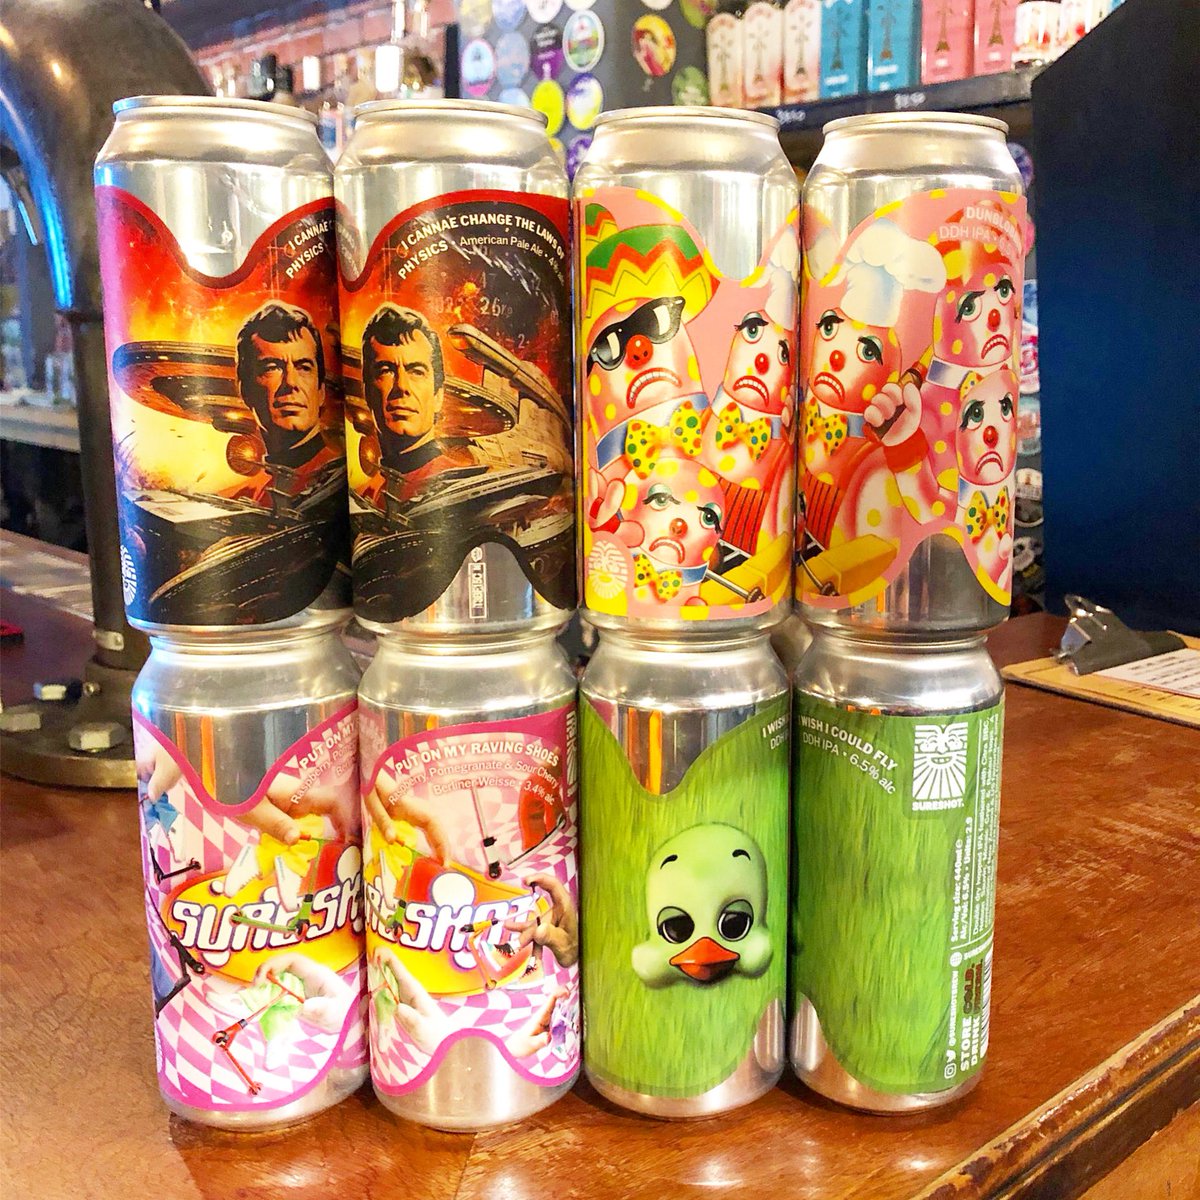 NEW #Sureshot and Mr Blobby IS BACK (DDH #IPA w/ Simcoe Cryo & T90 blobs) 😋 PLUS we have a Star Trek inspired (#GlutenFree) APA, Raspberry, Pomegranate & Cherry #Sour 🍒 AND look at little Orville’s face 😊 (DDH IPA) 🍺 #CraftBeer #CrystalPalace #SE19 @ShopSE19